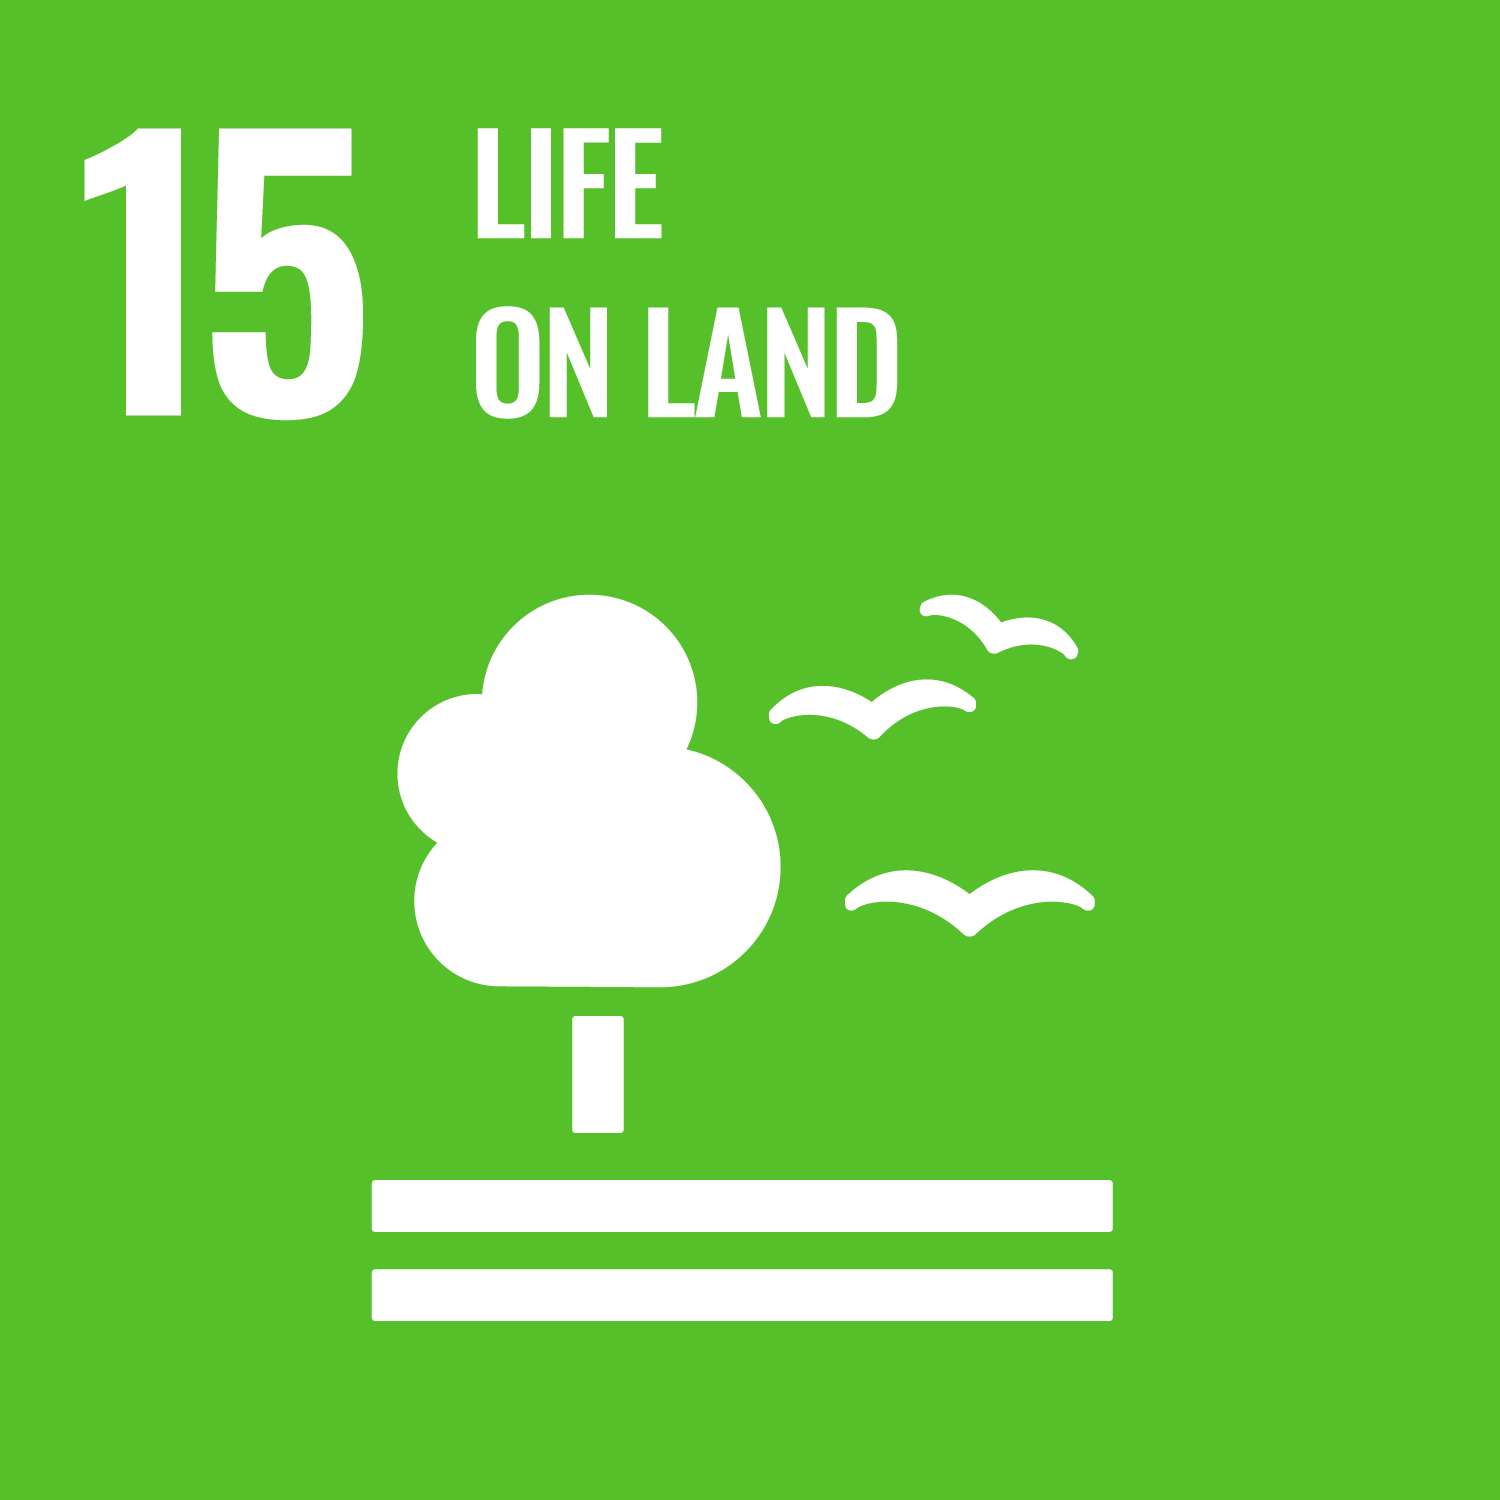 United Nations Sustainable Development Goal Number 15 Life on Land